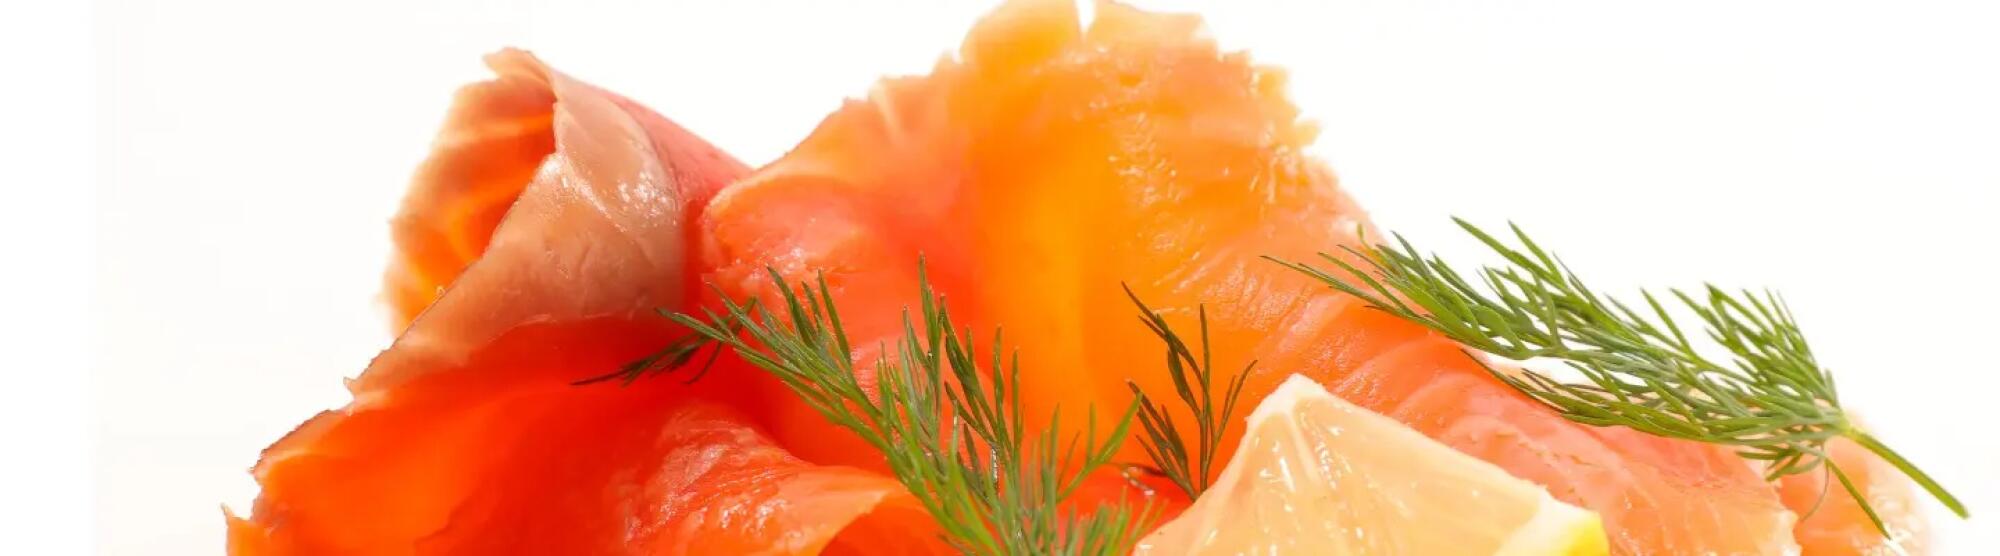 LA02_smoked-salmon-isolated-on-white-background-picture-id927898232